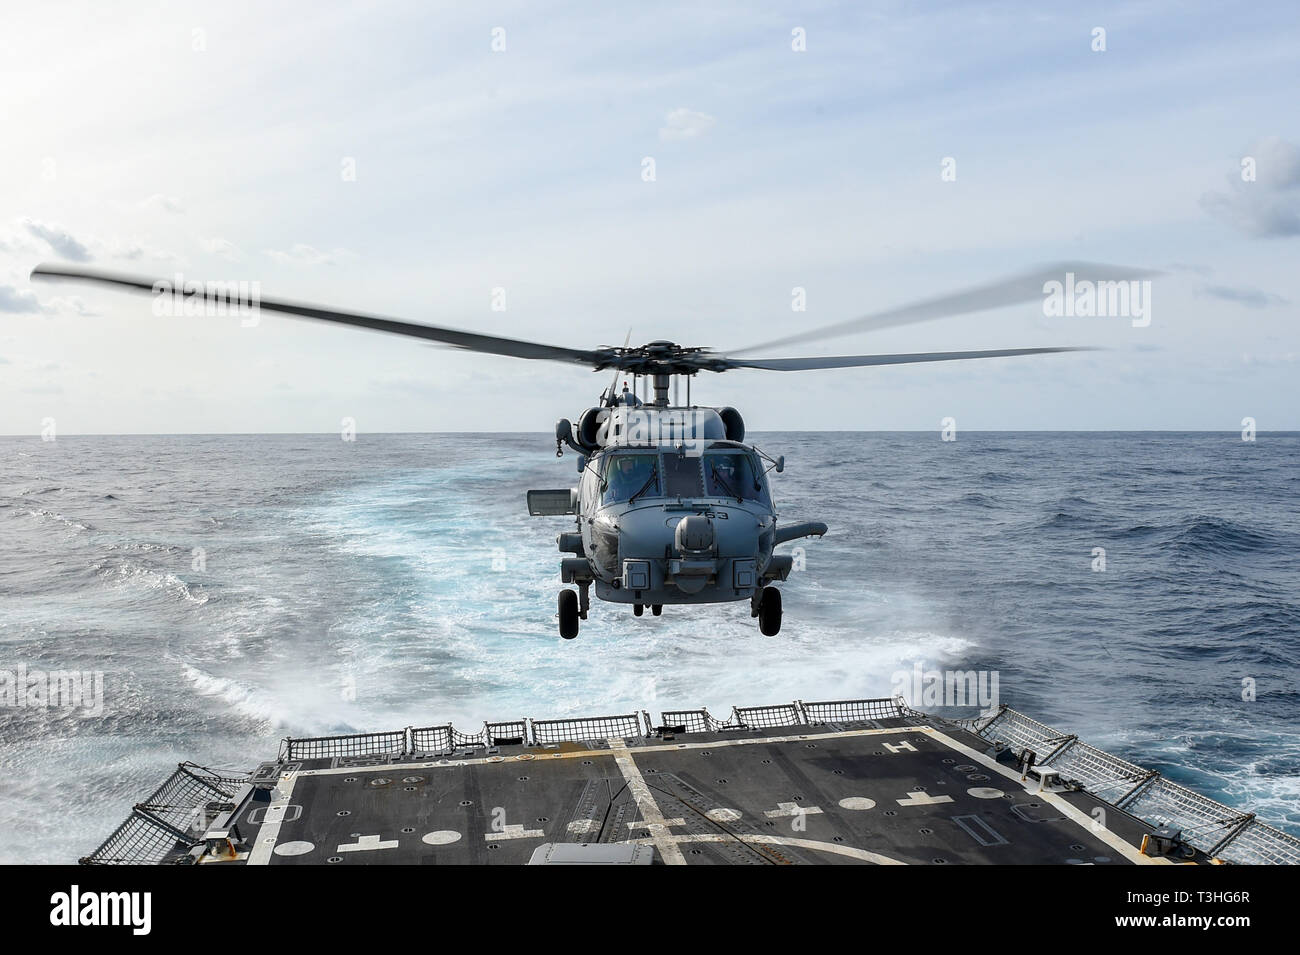 190404-N-UM706-0136 ATLANTIC OCEAN (April 4, 2019) An MH-60R Sea Hawk Helicopter assigned to the “Grandmasters” of Helicopter Maritime Strike Squadron (HSM) 46 takes off of the flight deck aboard the Arleigh Burke-class guided-missile destroyer USS Nitze (DDG 94). Nitze is underway as part of Abraham Lincoln Carrier Strike Group (ABECSG) deployment in support of maritime security cooperation efforts in the U.S. 5th, 6th and 7th Fleet areas of responsibility. With Abraham Lincoln as the flagship, deployed strike group assets include staffs, ships and aircraft of Carrier Strike Group 12 (CSG 12) Stock Photo